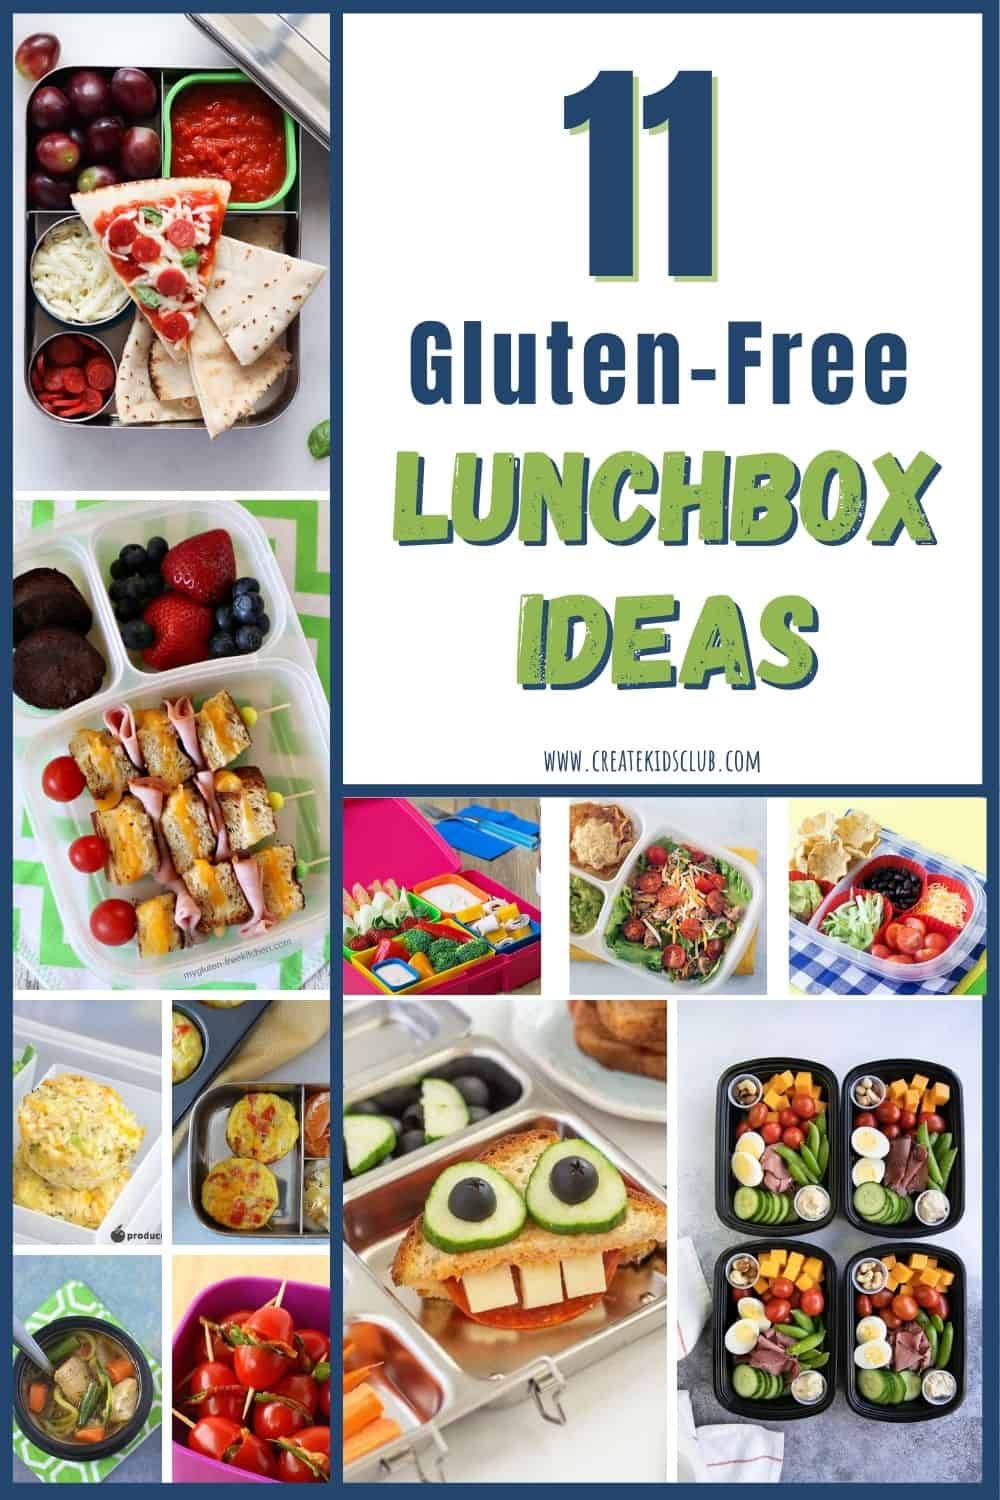 Pictures of gluten free lunchbox ideas that are not sandwiches.